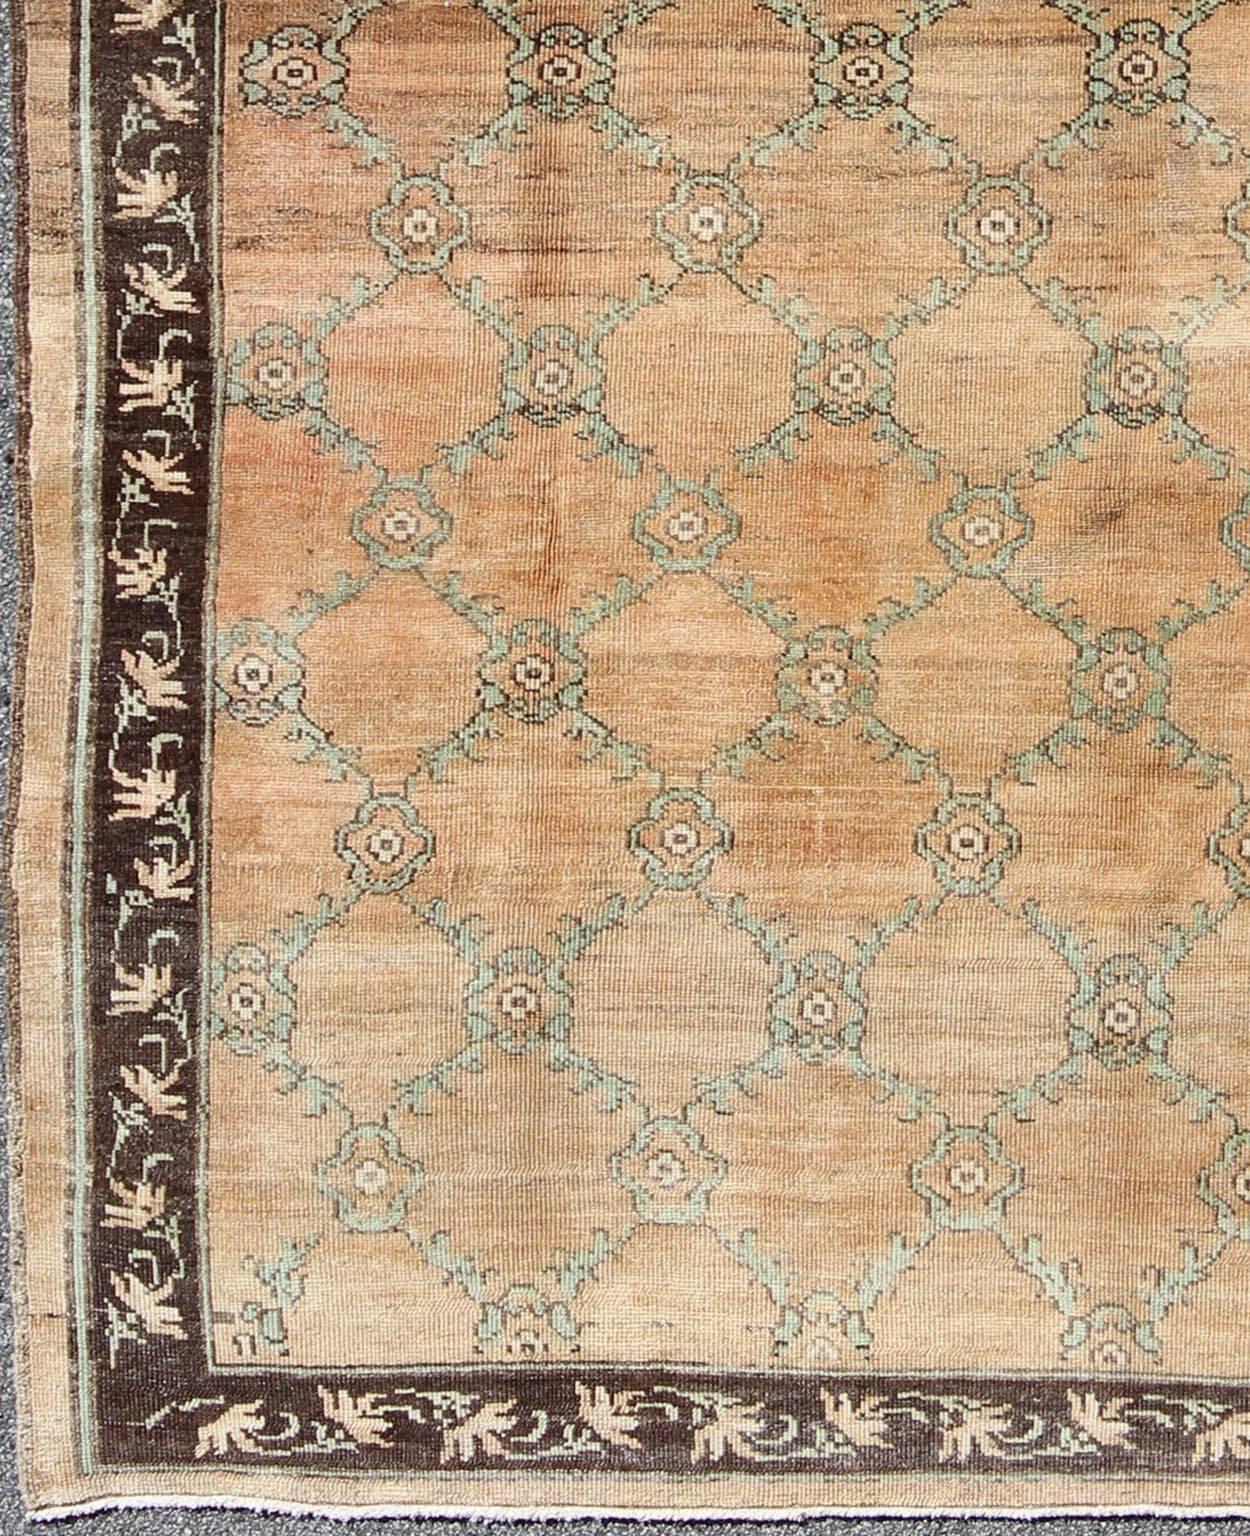 This magnificent Oushak beautifully illustrates the impressive craftsmanship and design of Turkish weavers. The muted design of repeating flowers in light green on a orange background flows through the rug's center field. Linear flower branches in